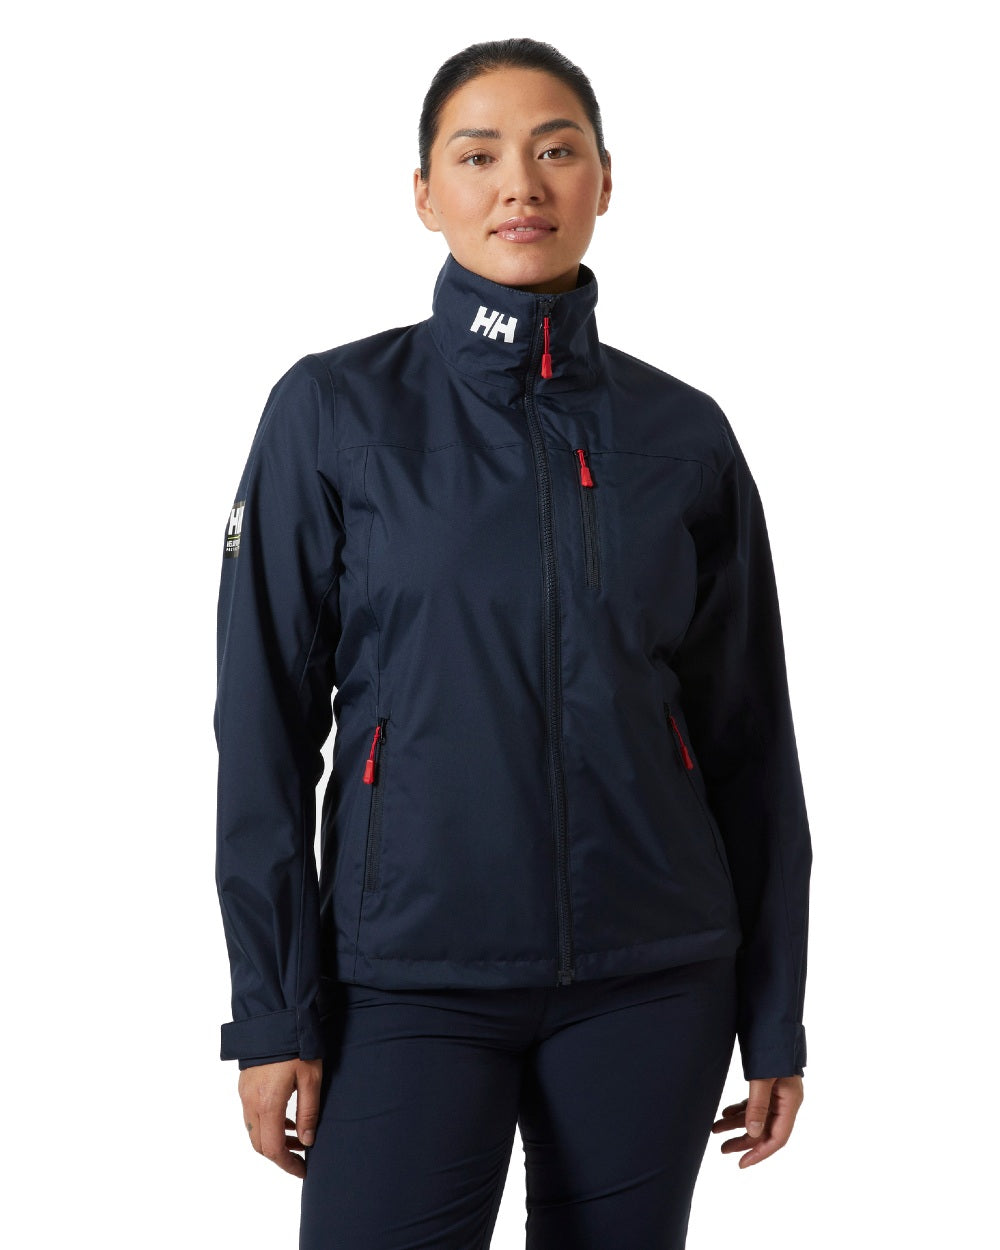 Navy coloured Helly Hansen Womens Crew Sailing Jacket 2.0 on white background 